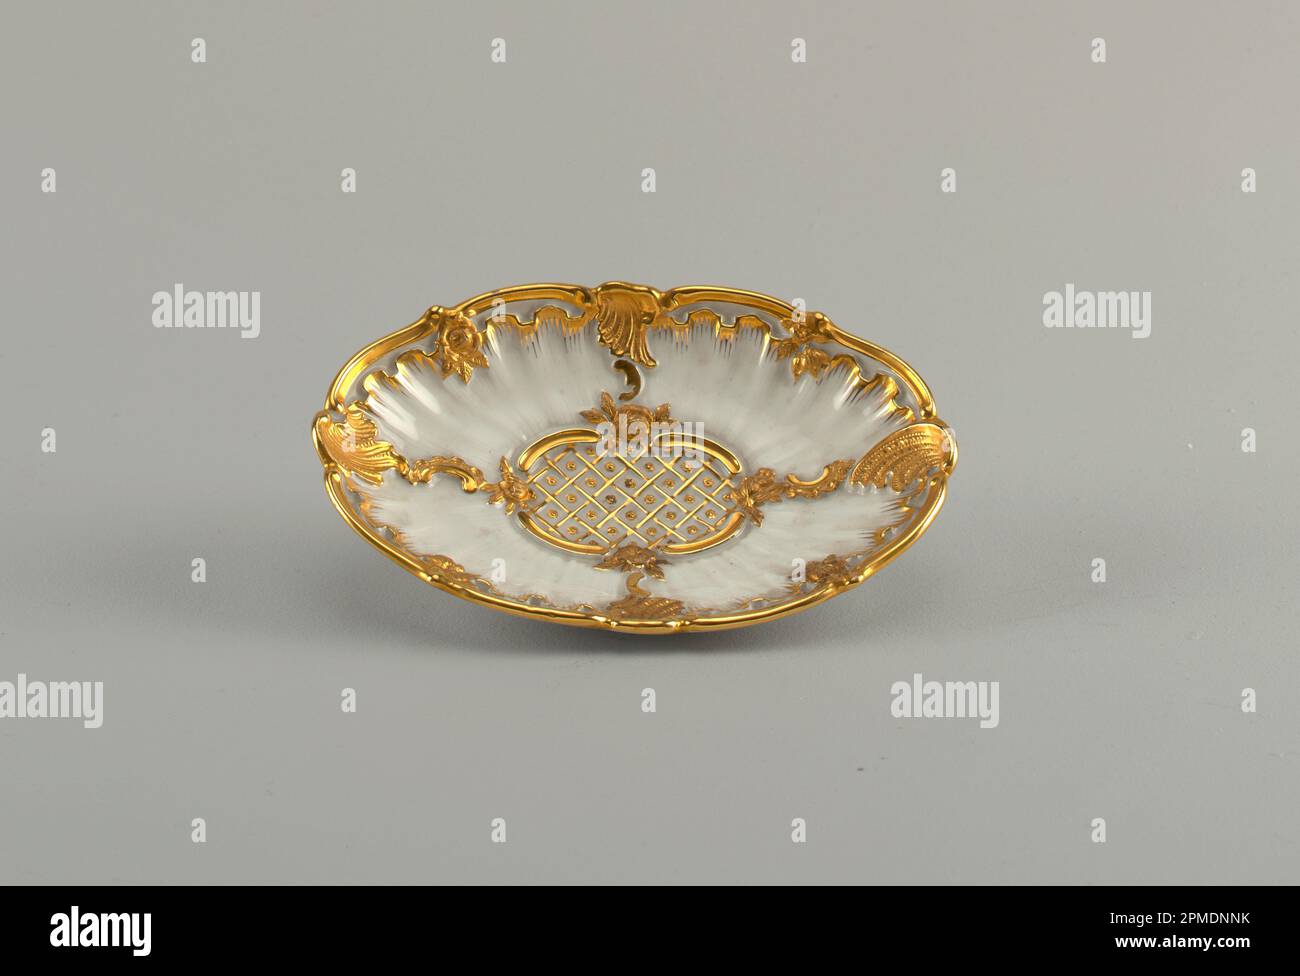 Oval Dish Dish; Manufactured by Meissen Porcelain Manufactory (Germany); porcelain, gold Stock Photo